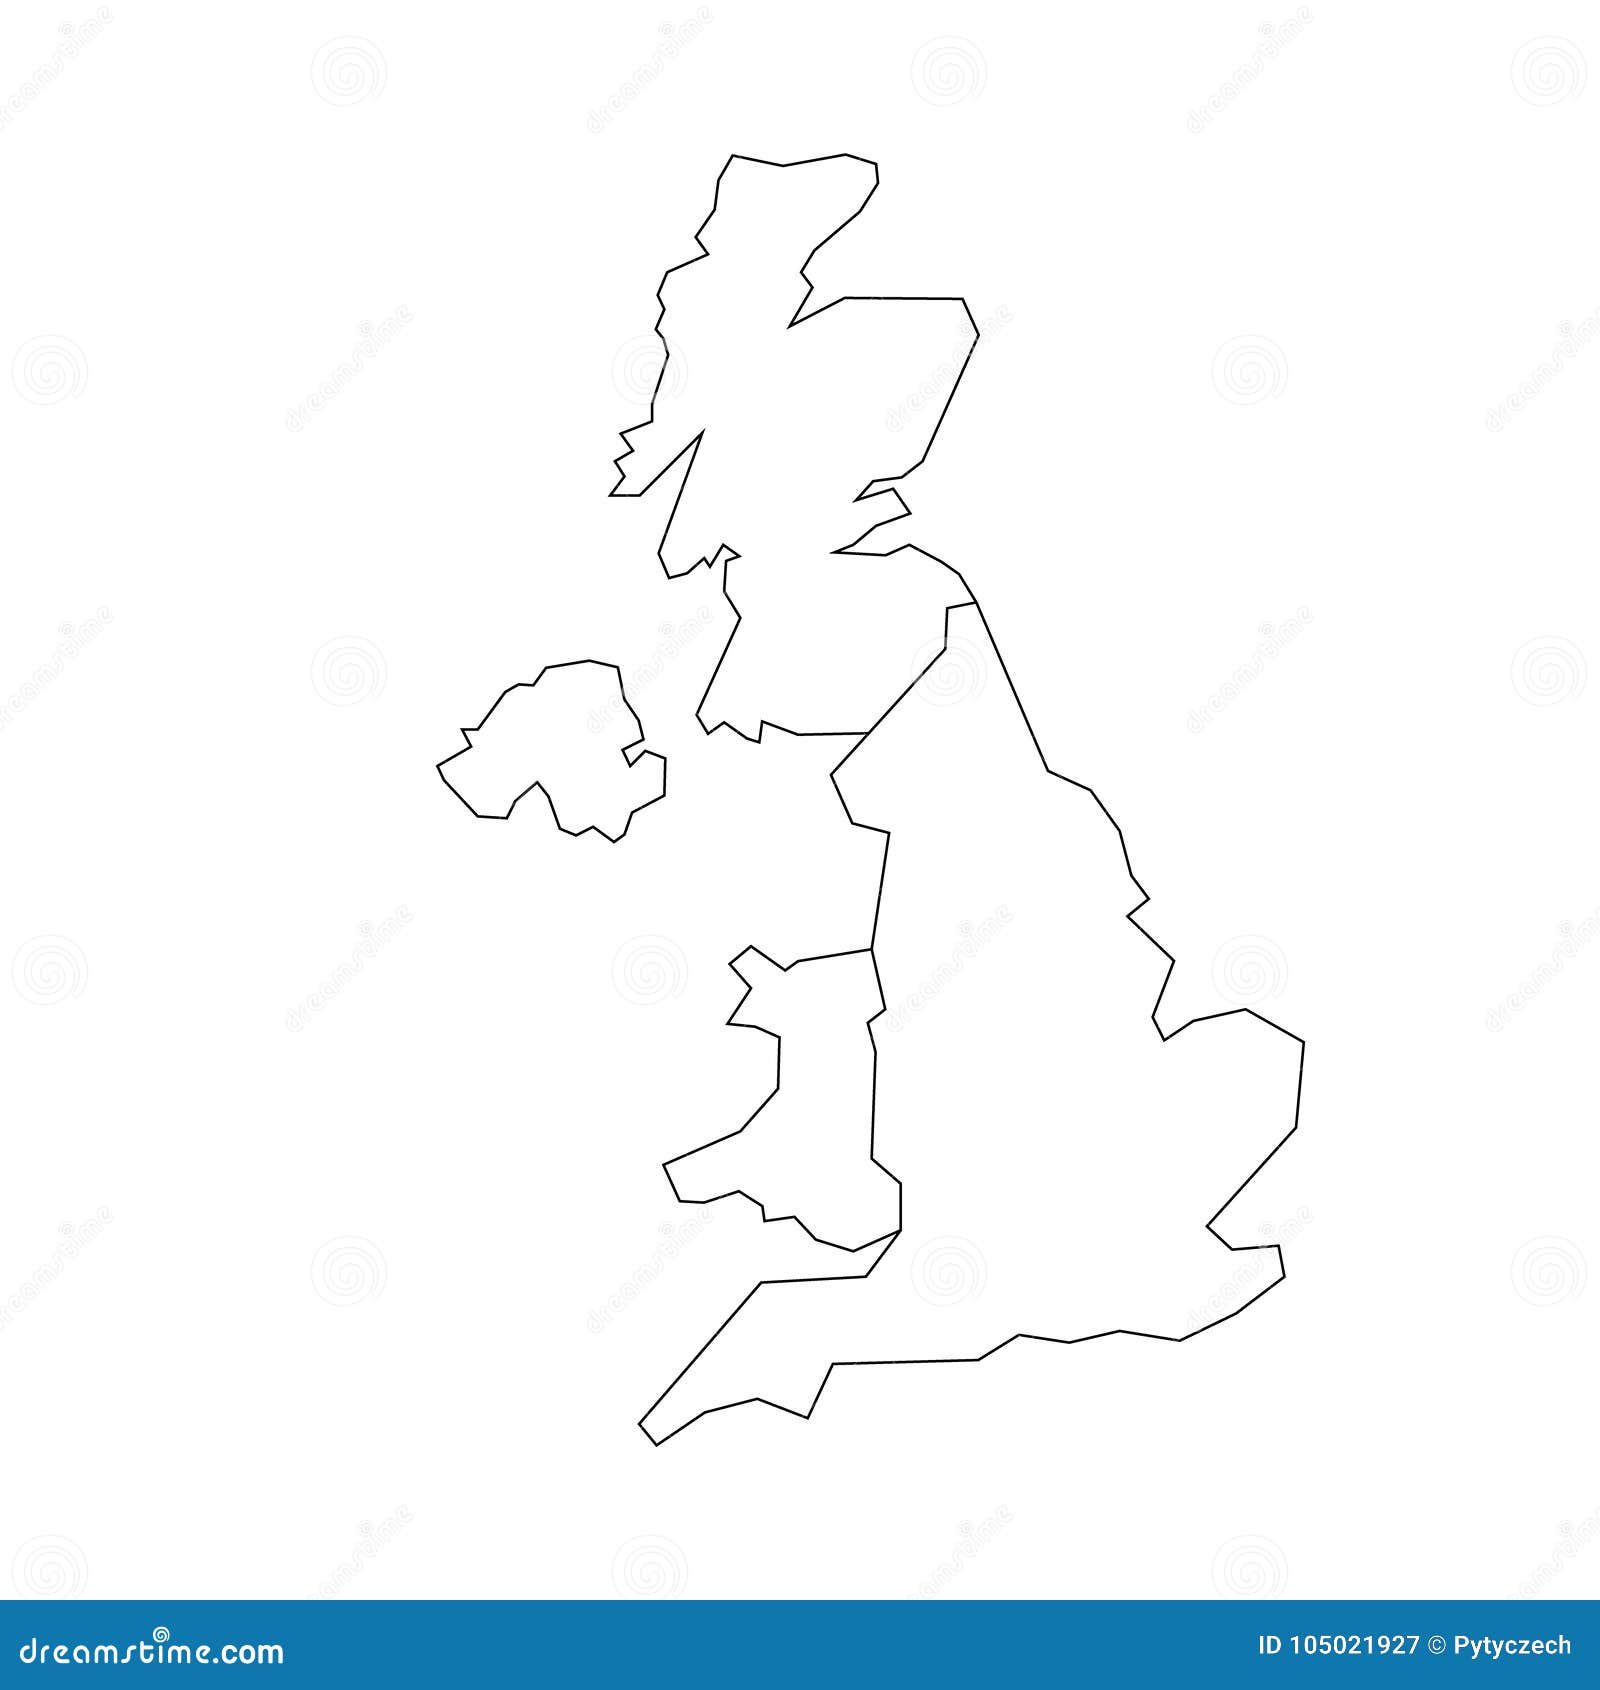 map of united kingdom countries - england, wales, scotland and northern ireland. simple flat  outline map